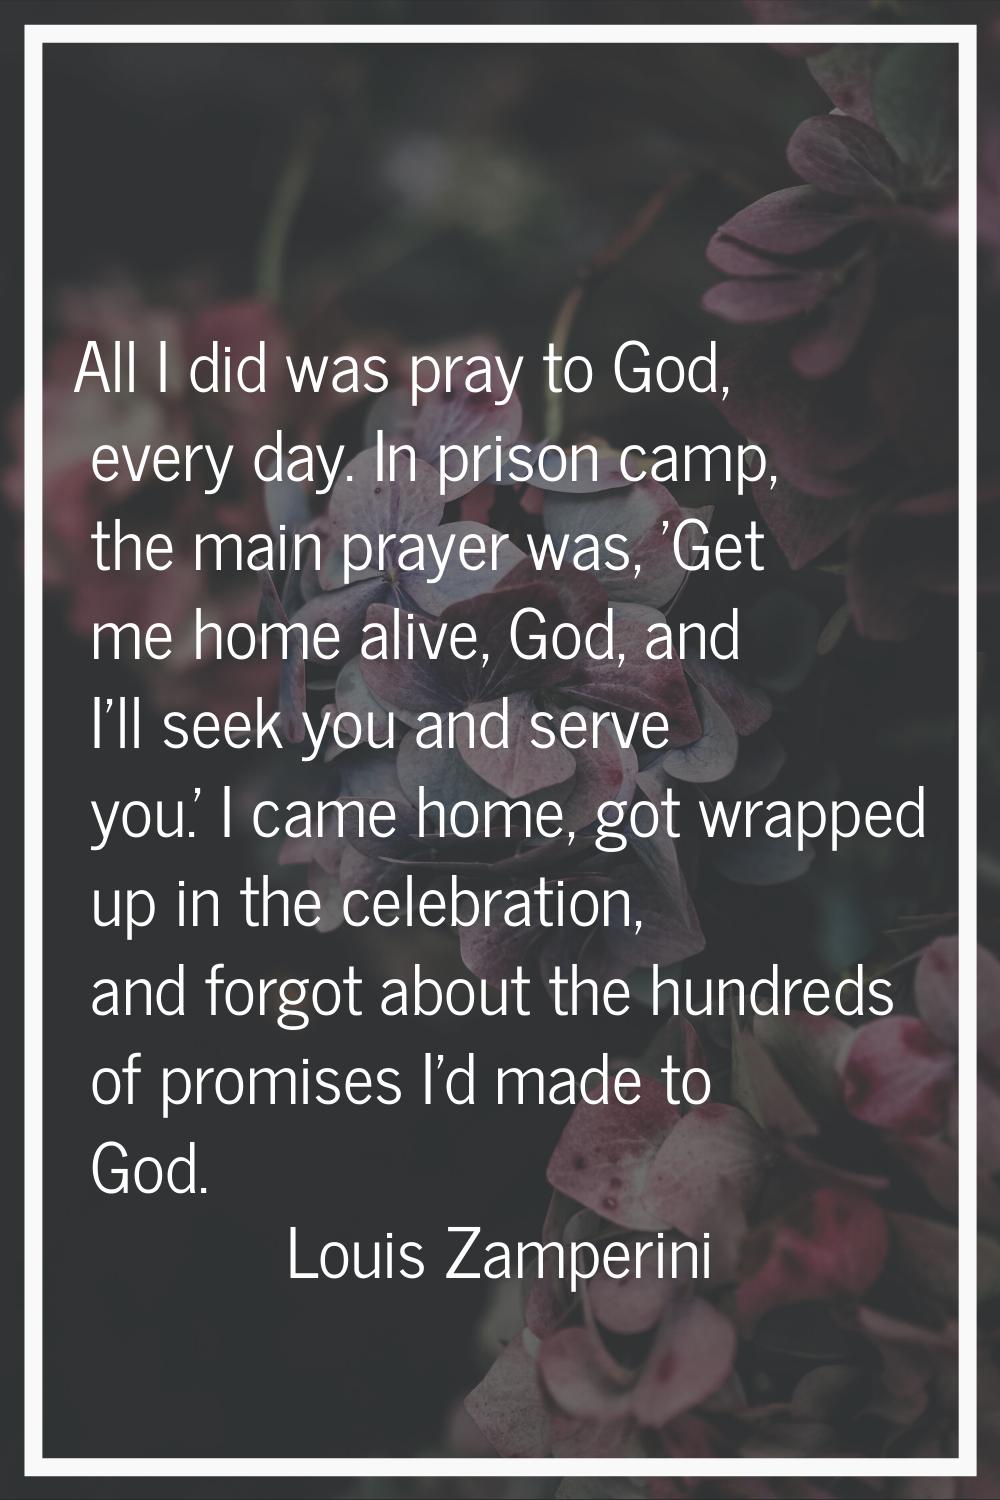 All I did was pray to God, every day. In prison camp, the main prayer was, 'Get me home alive, God,